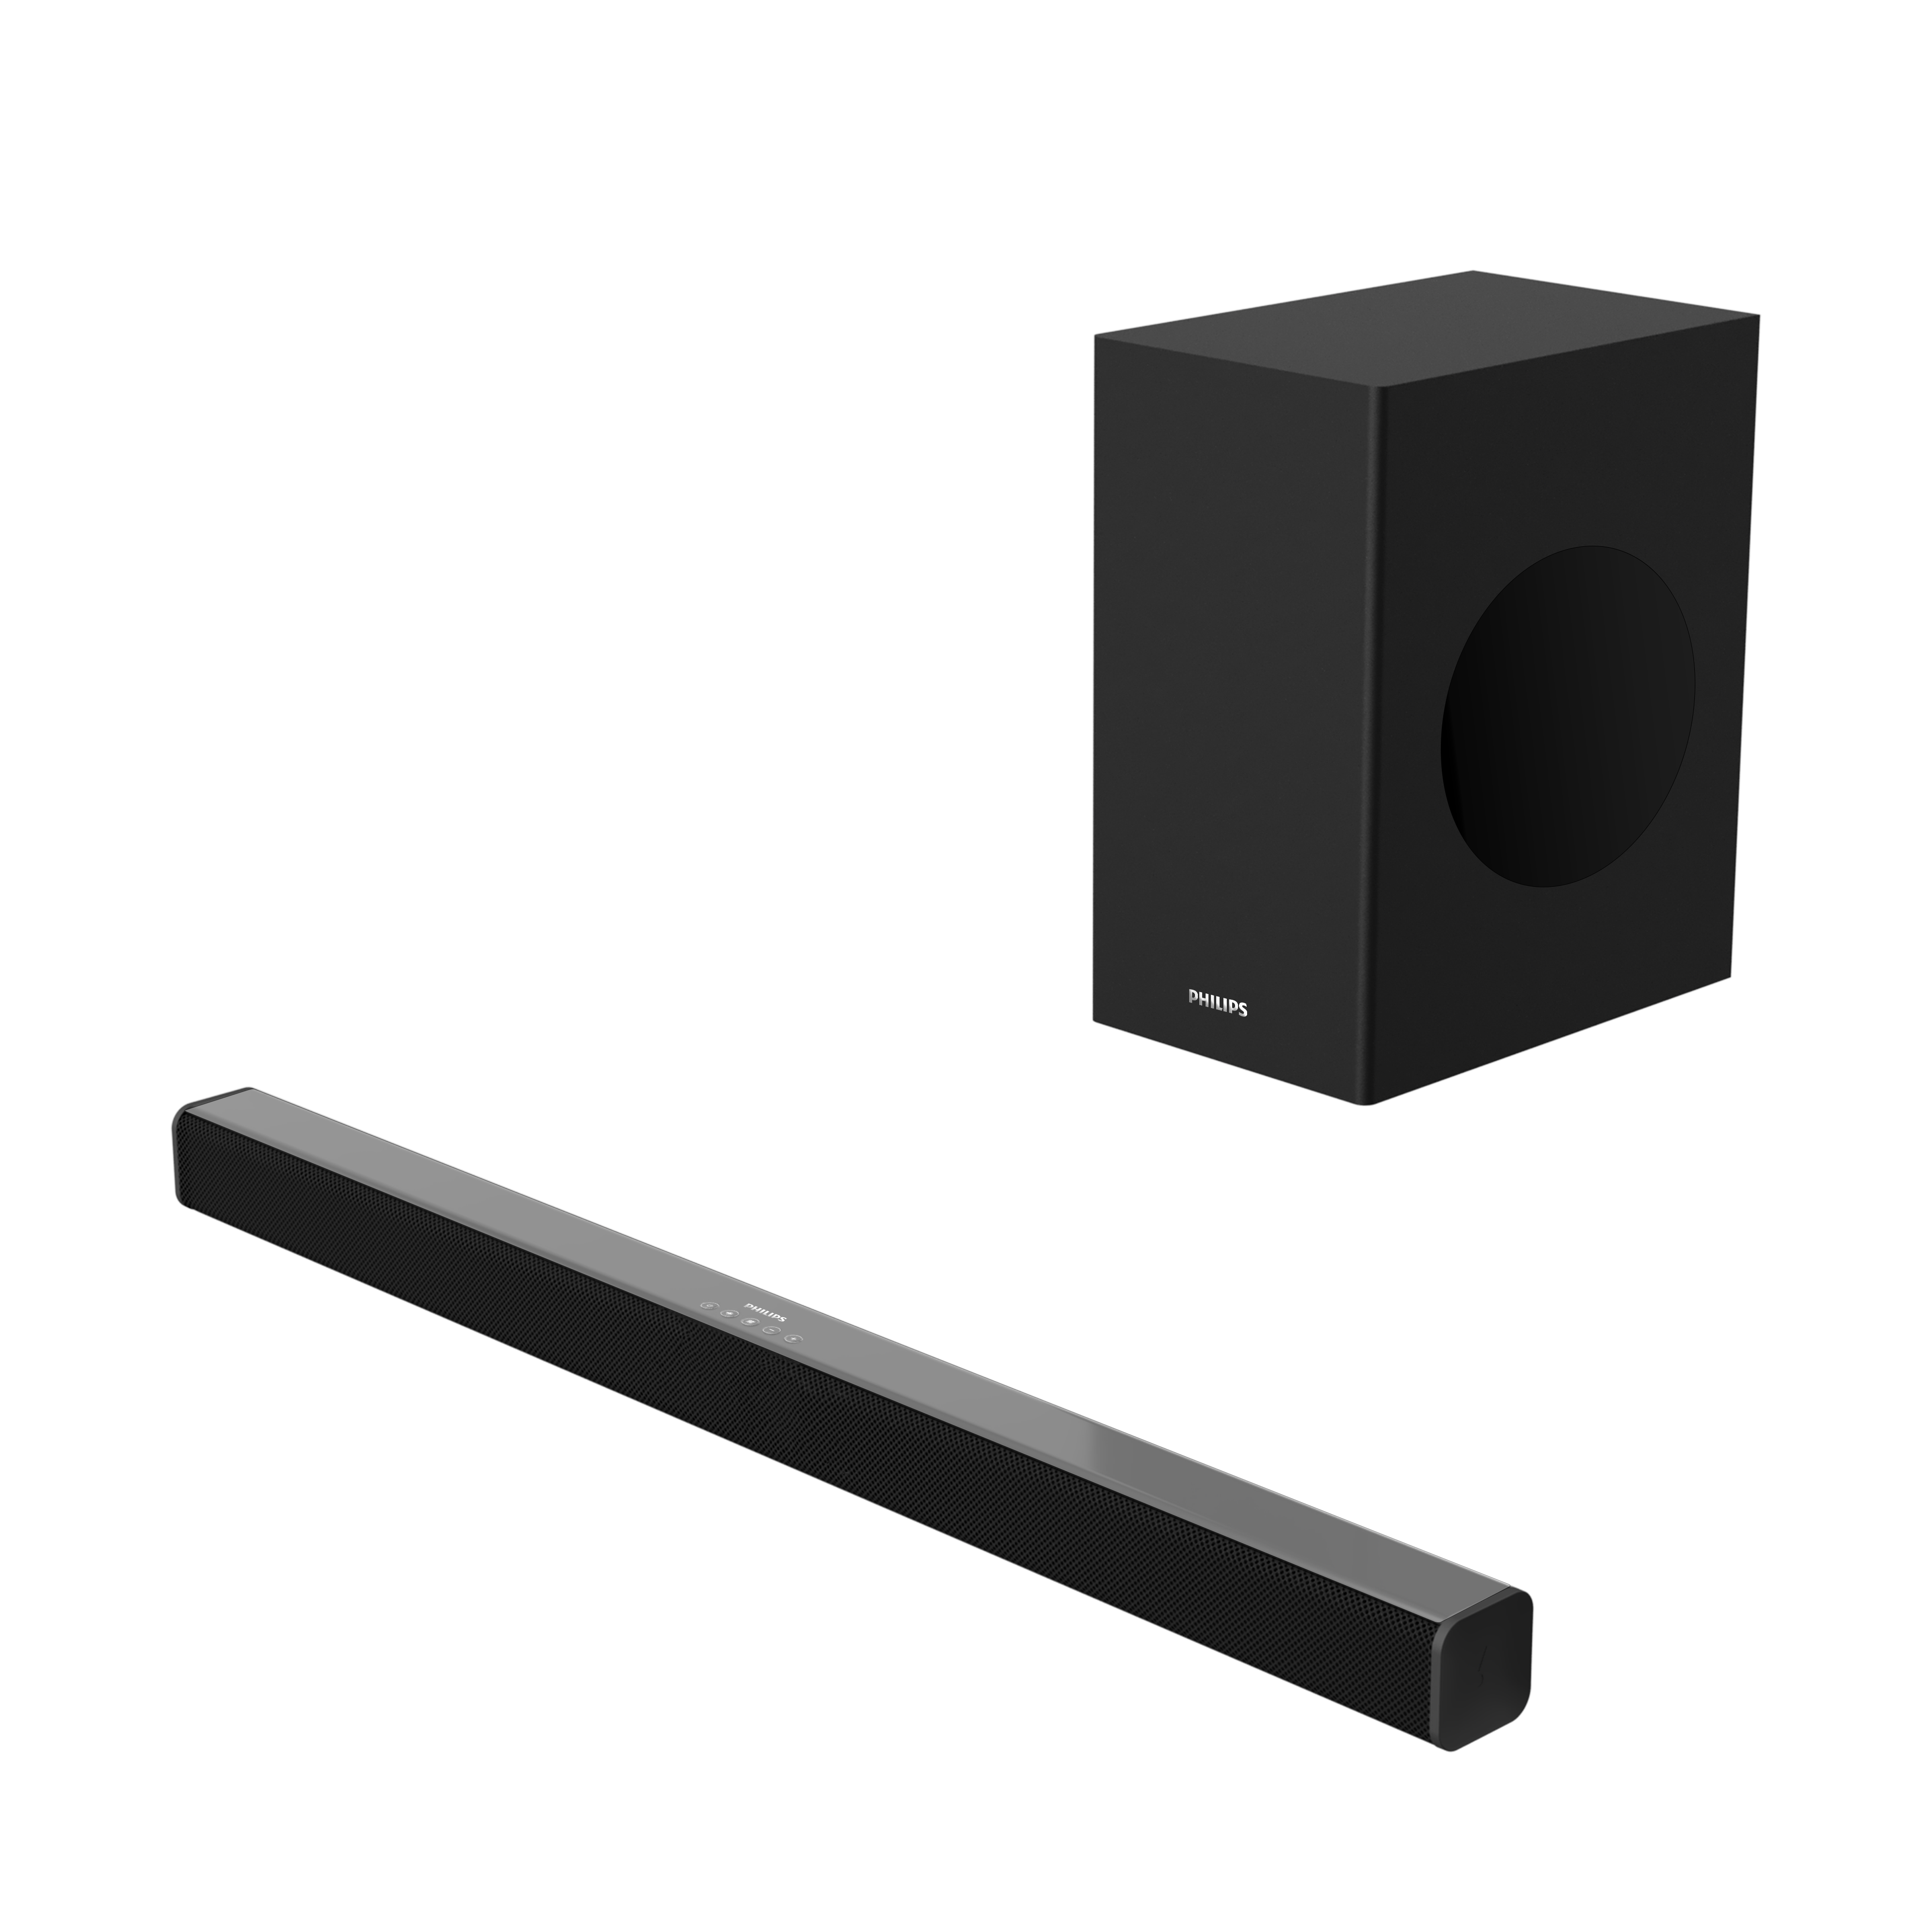 Key Features of the New Philips TAB4228 Soundbar